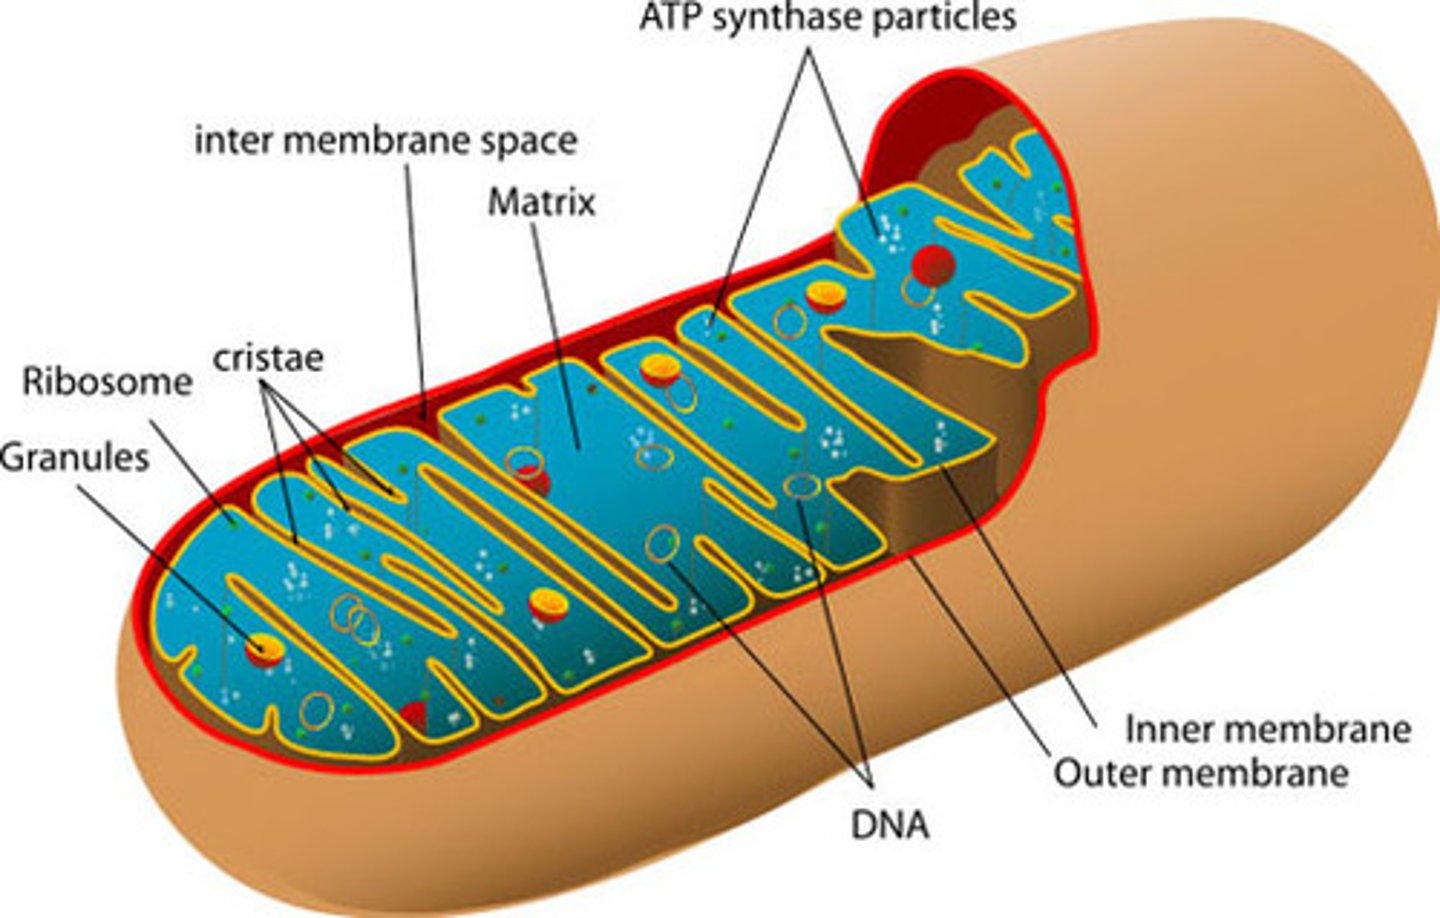 <p>-has 2 membrane and its own DNA that produces ATP (which is broken down to produce energy)</p><p>- ATP is produced on the inner membrane of the mitochondria</p><p>- has folds on the inner membrane because the more surface area the inner membrane has, the more surface area the membrane has, the more area there is to produce ATP</p><p>Extra Note:</p><p>You only get Mitochondrial DNA from your mother.</p>